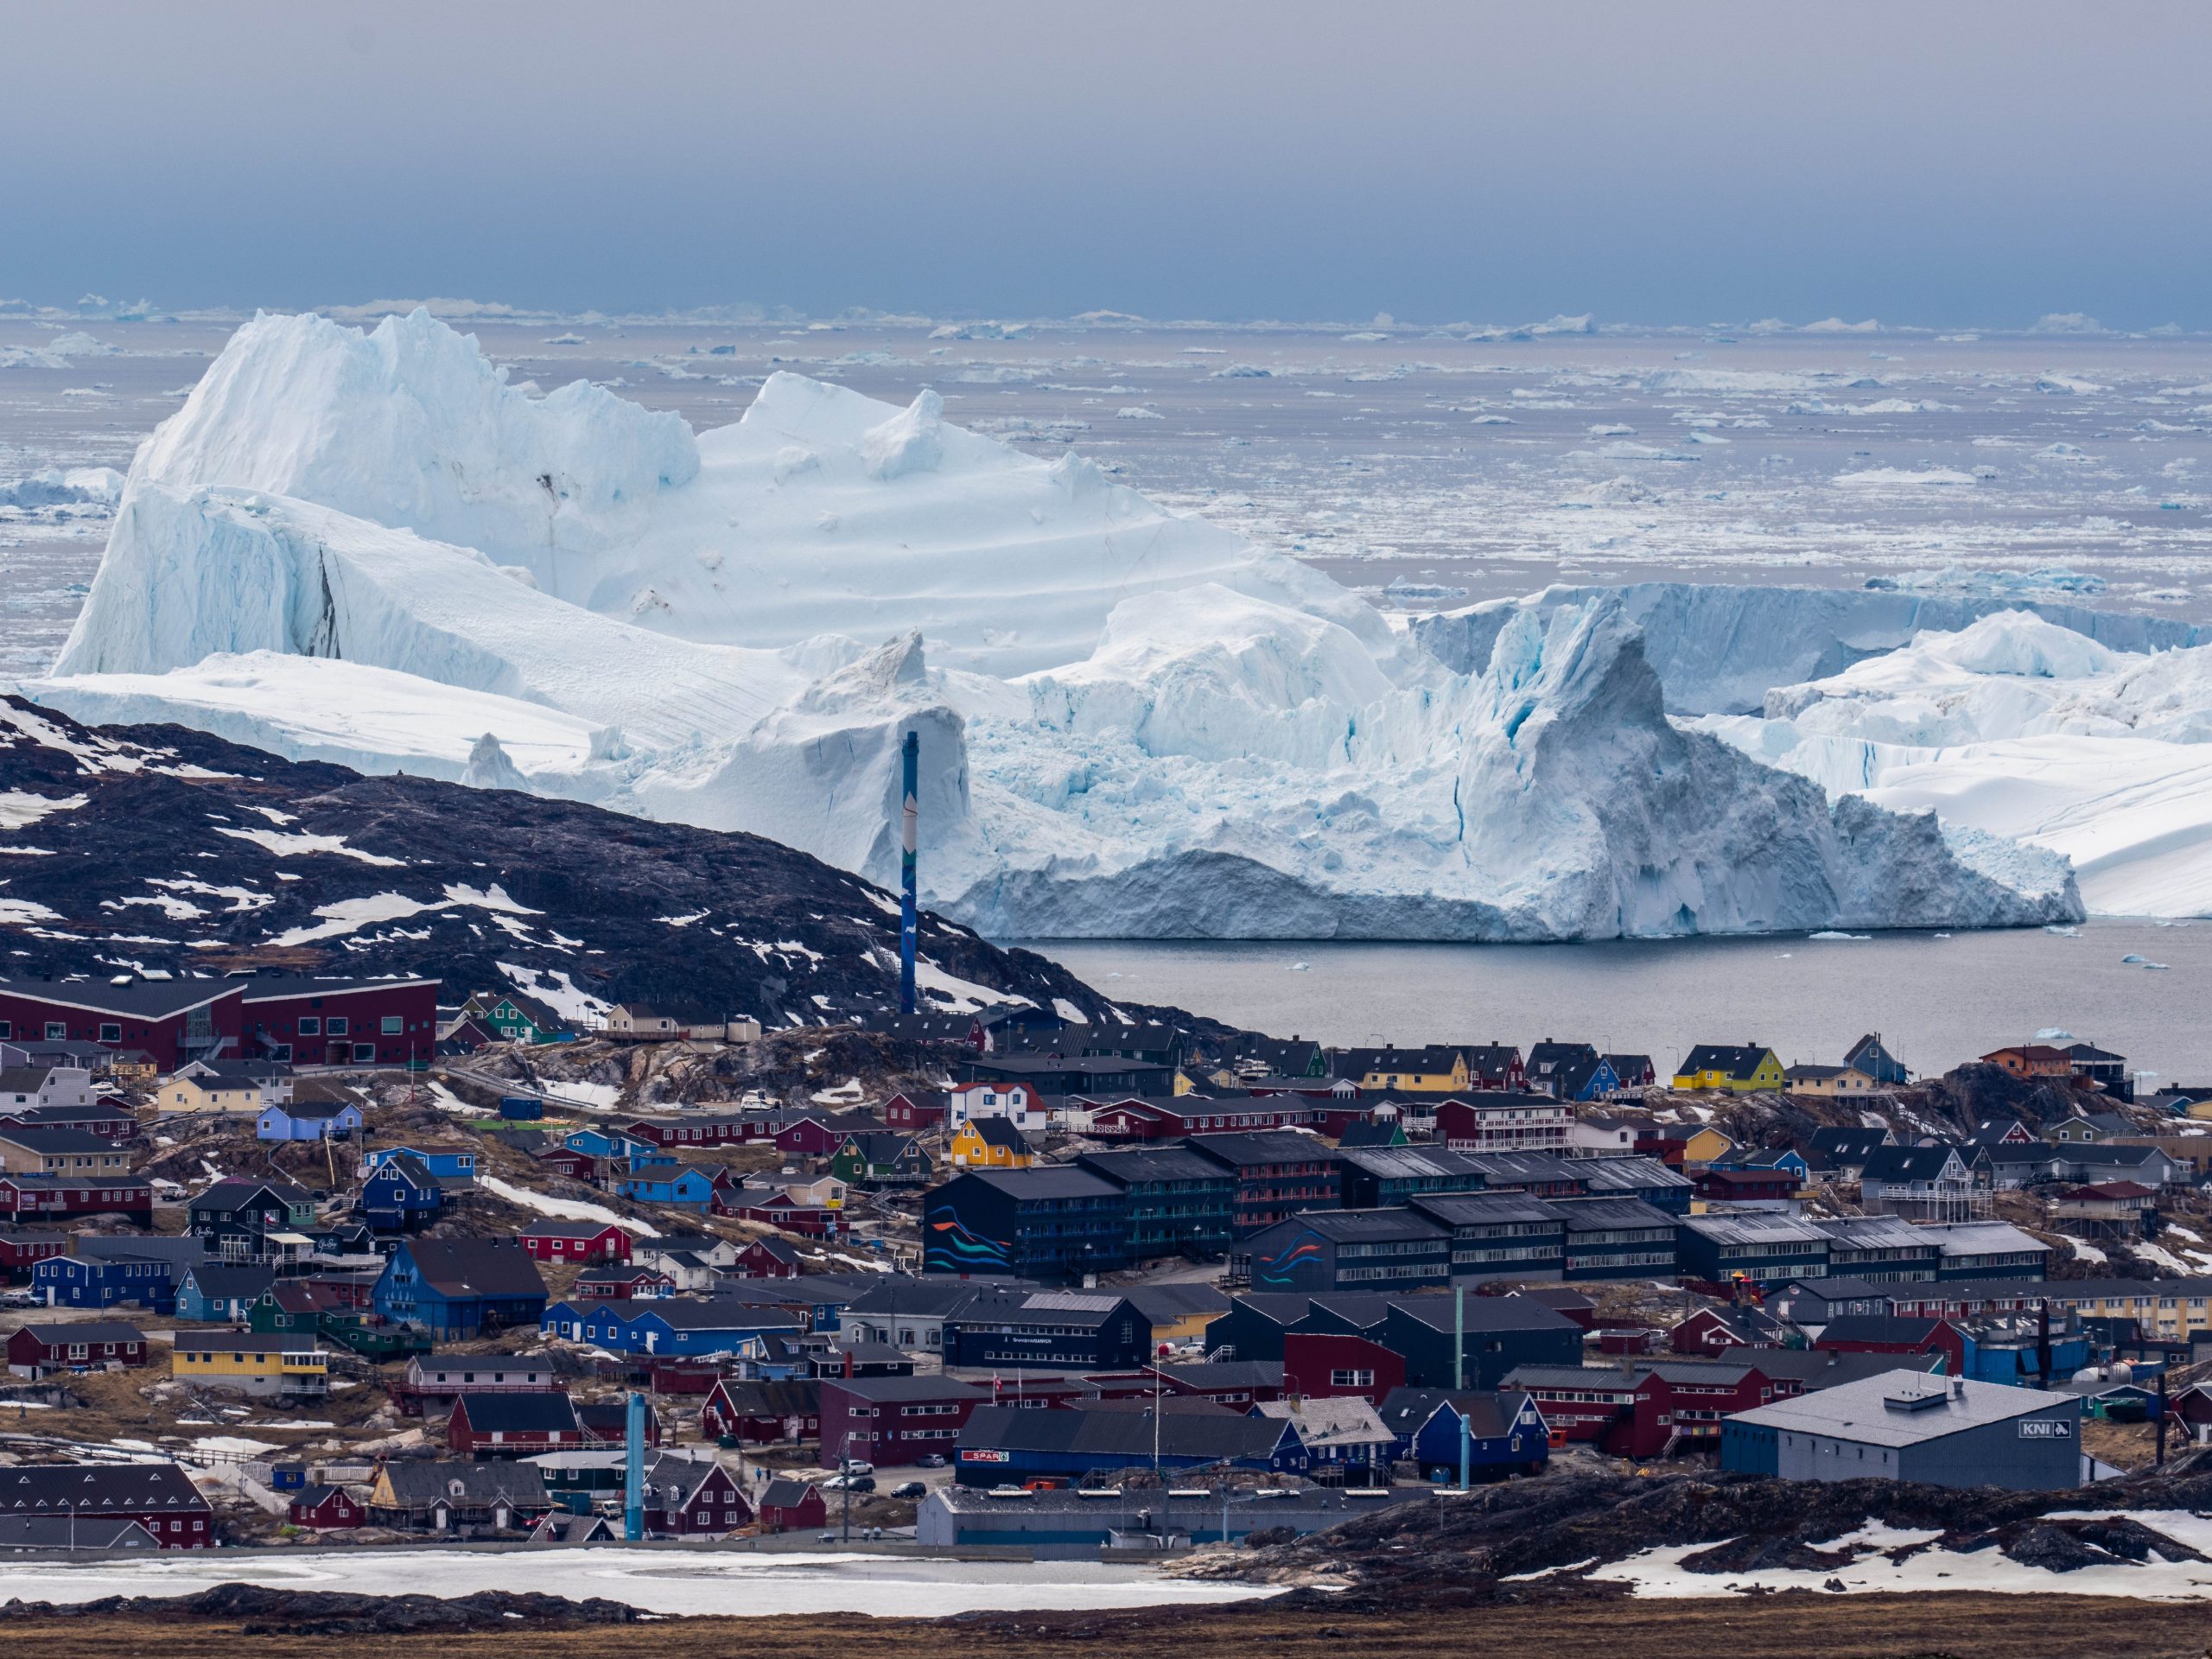 Icebergs near Ilulissat, Greenland. Climate change is having a profound effect in Greenland with glaciers and the Greenland ice cap retreating.